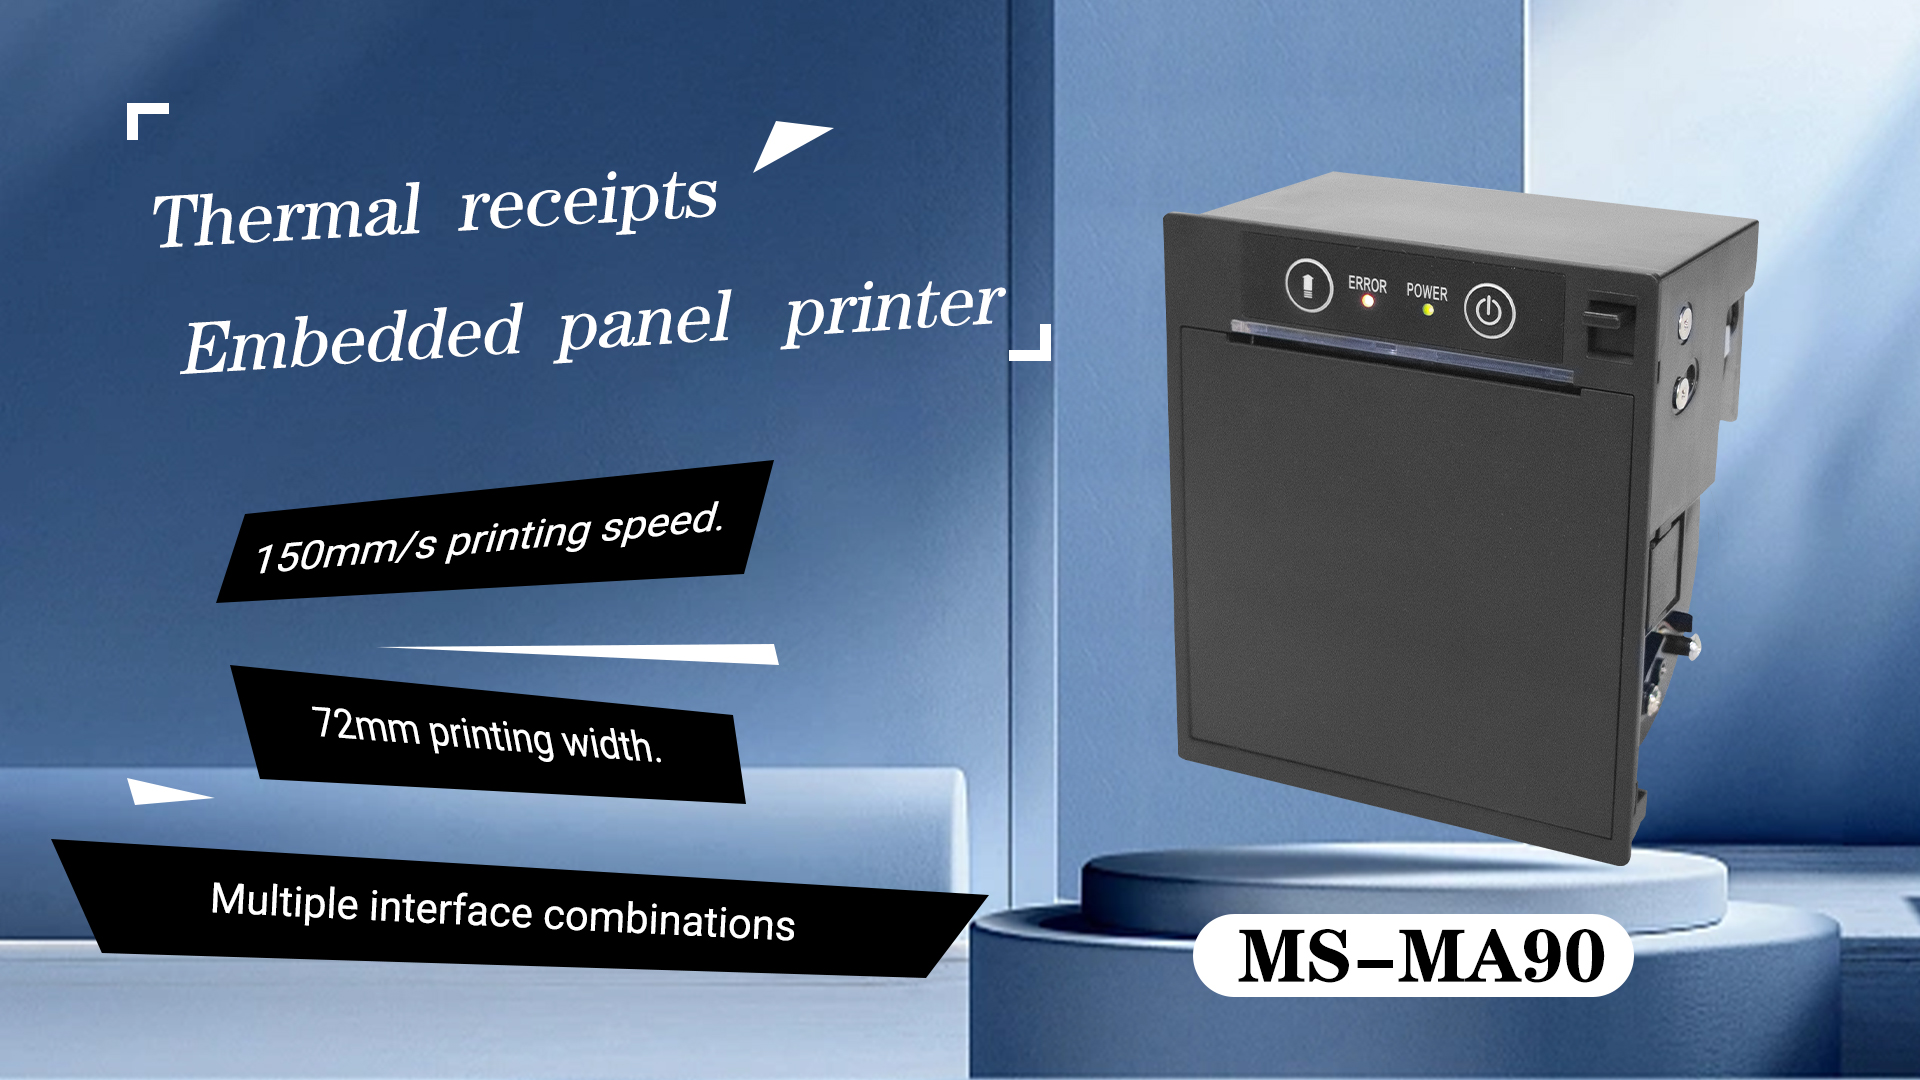  MASUNG Color Printer MS-MA90 Provides Solutions for New Retail and Many Other Industries